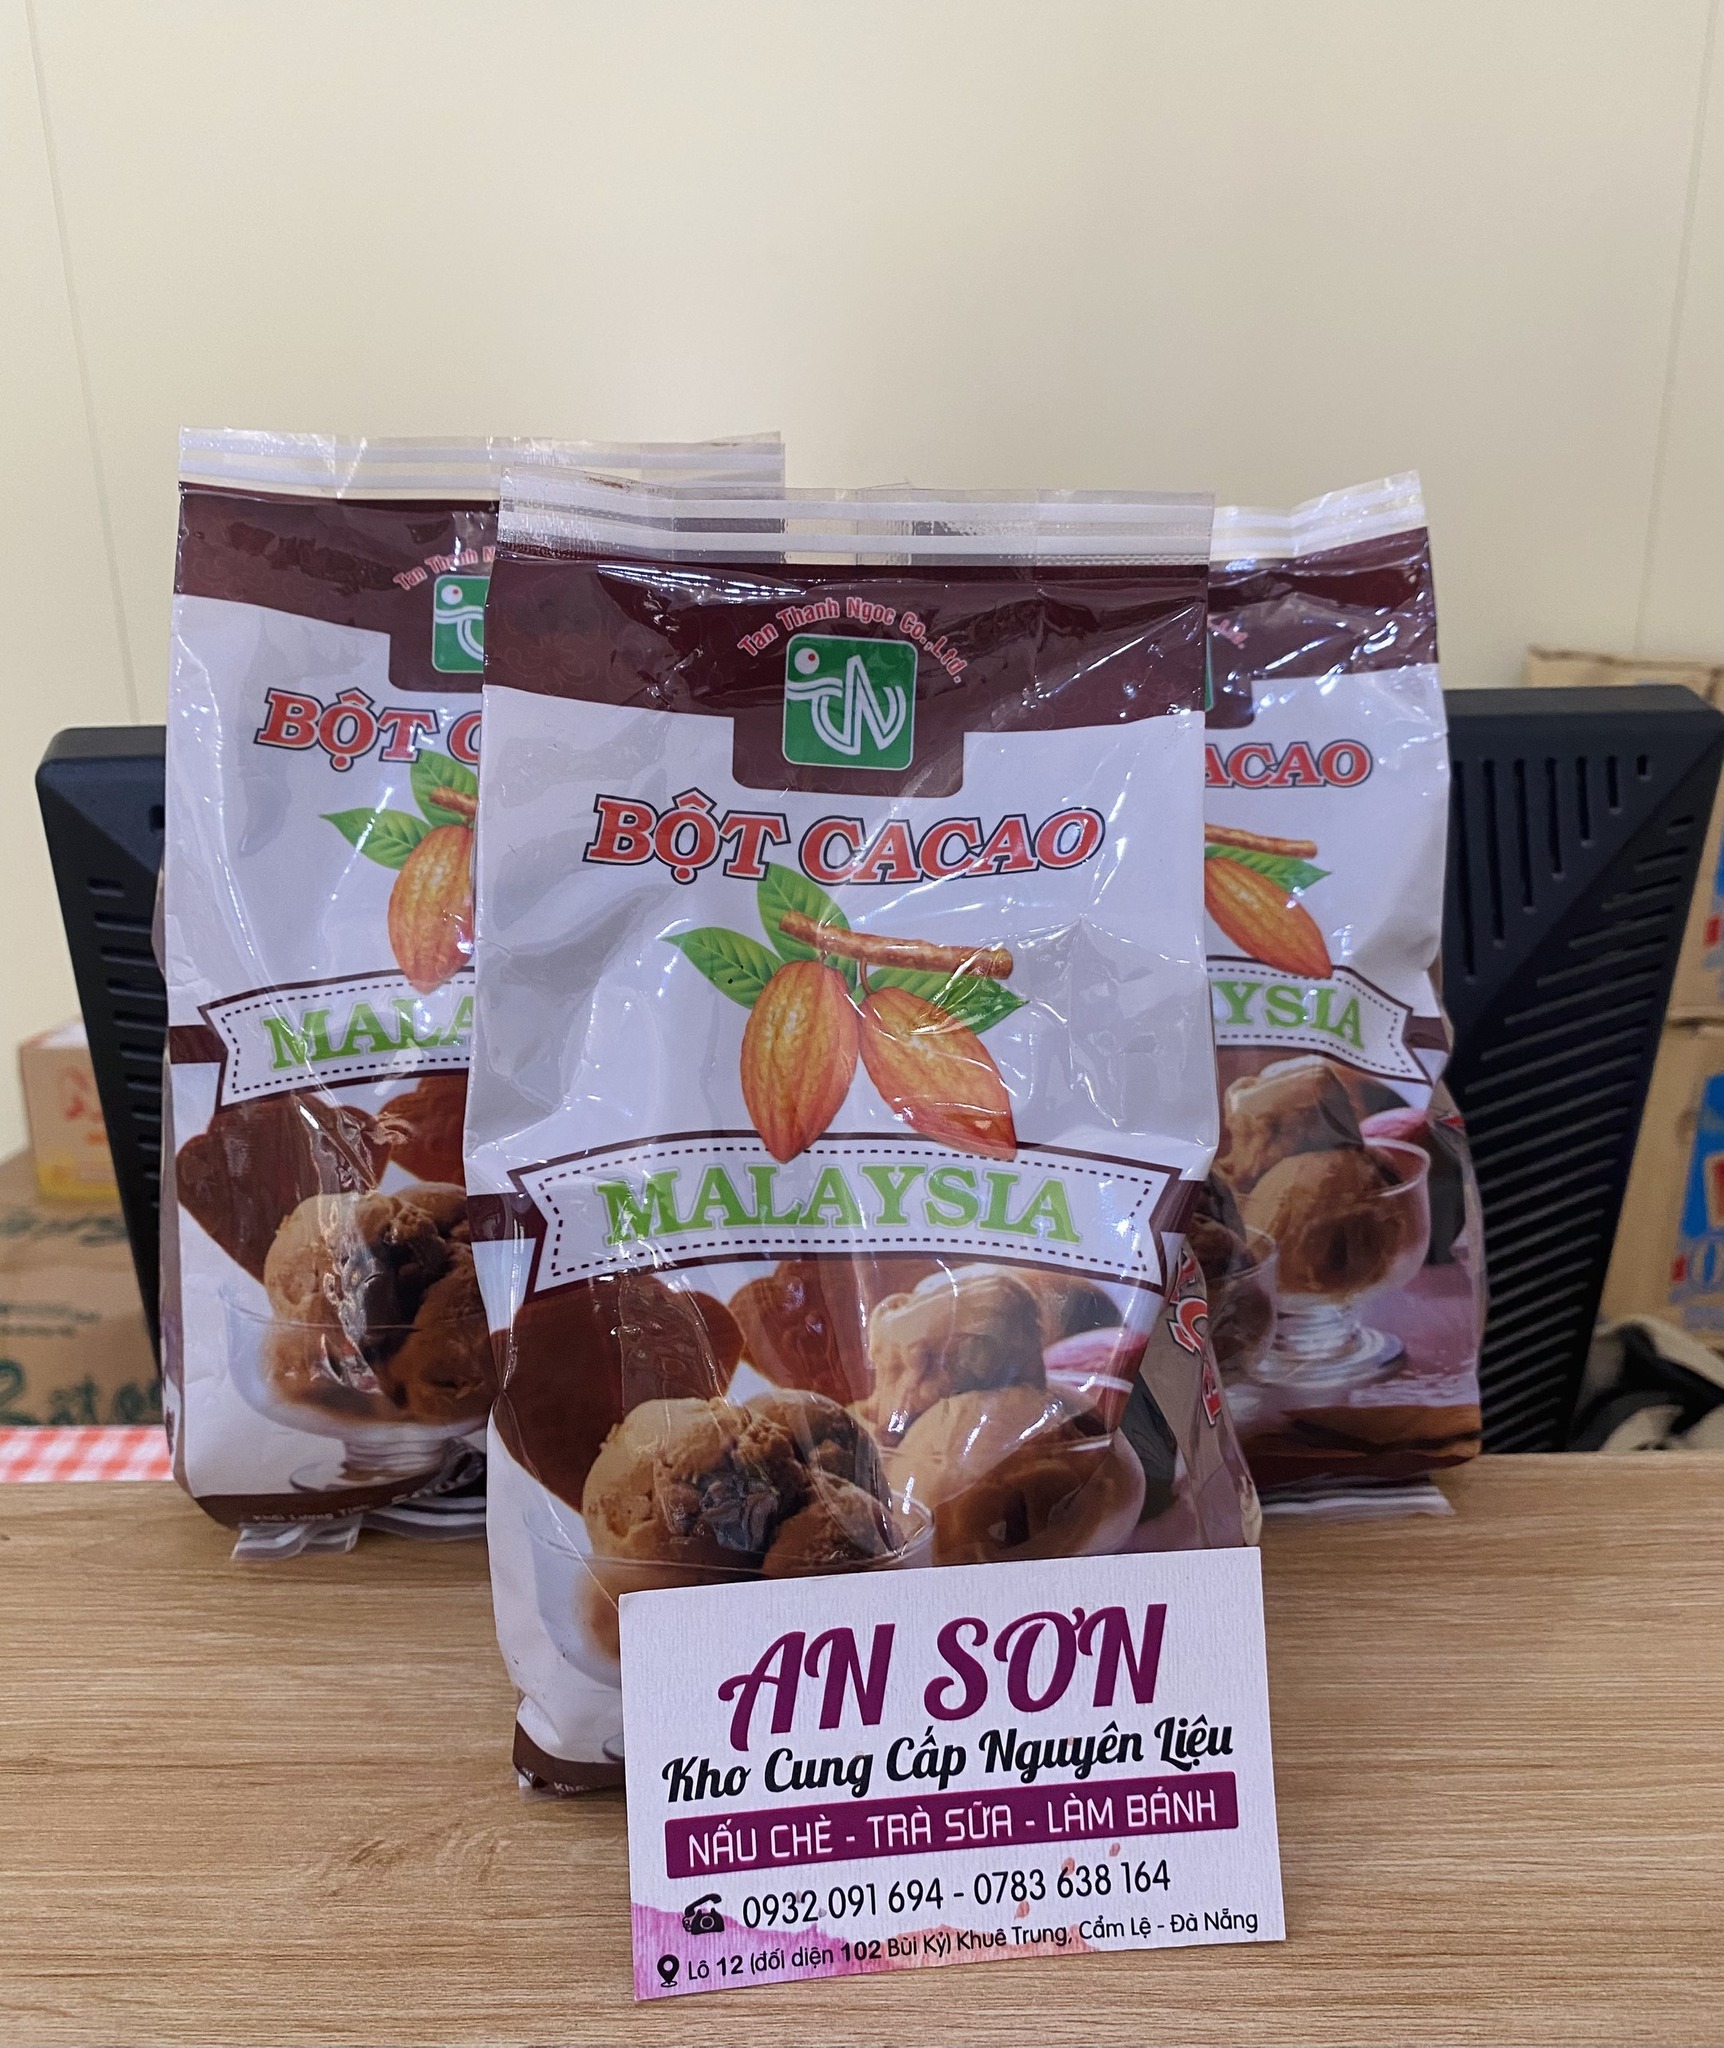 Bột cacao Malaysia